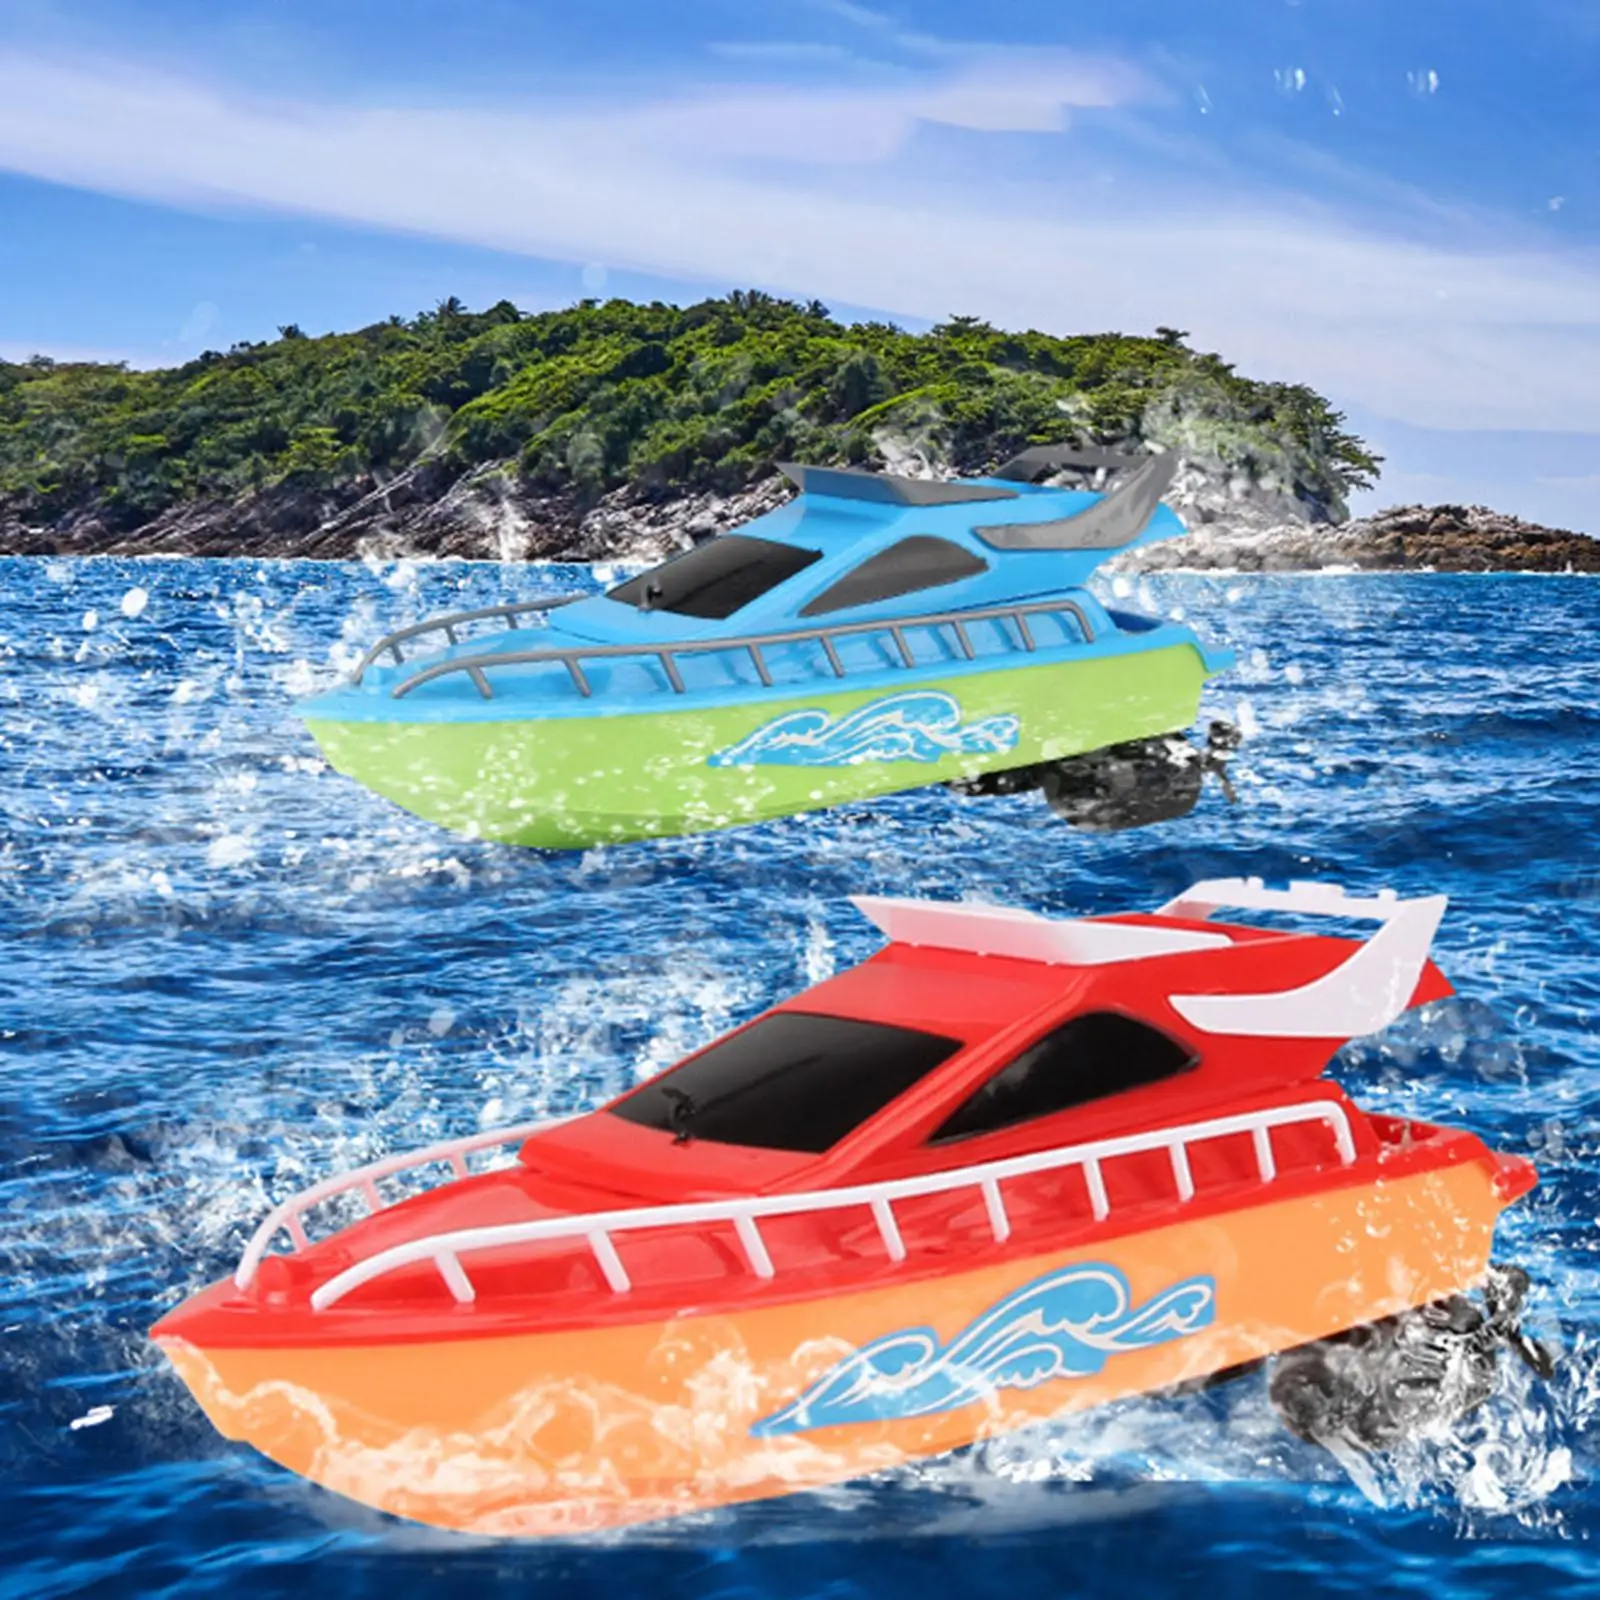 High Speed Remote Control Speedboat Pools Lakes Outdoor Toys for Boys Toy Electronic Wireless RC Boat Children Gifts